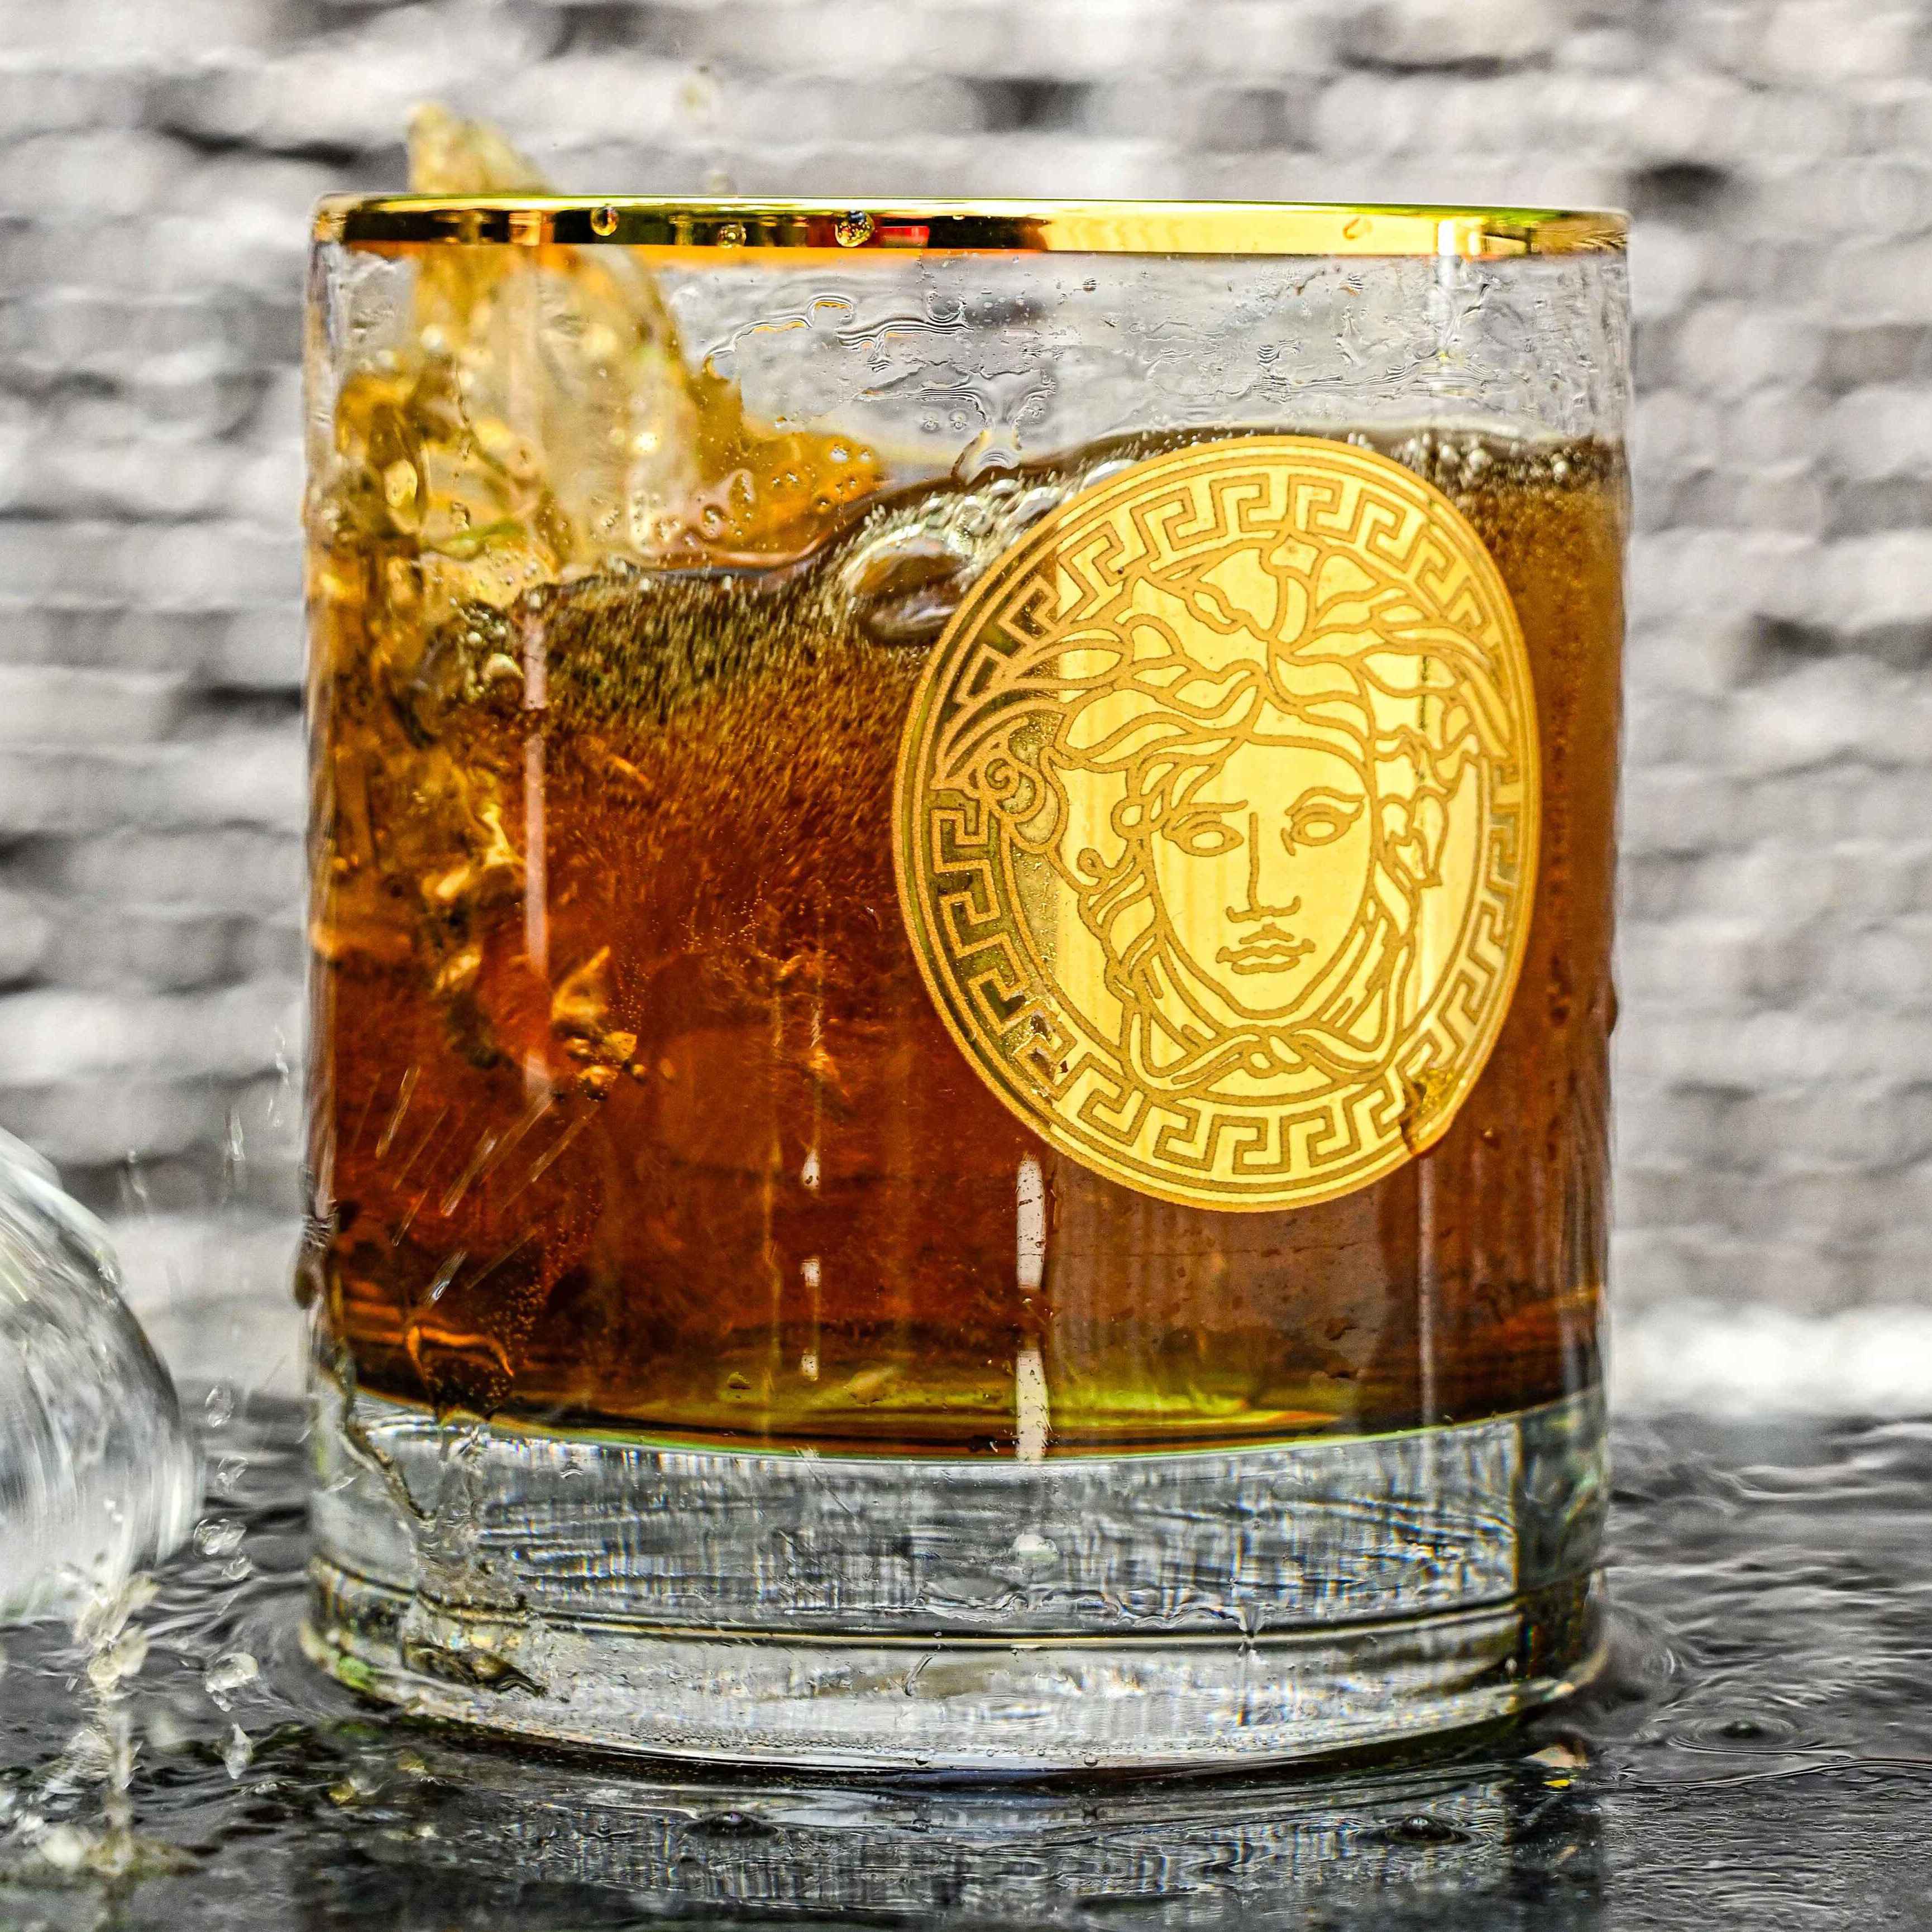 Emperor Versace Gold Plated Pure Crystal Glass